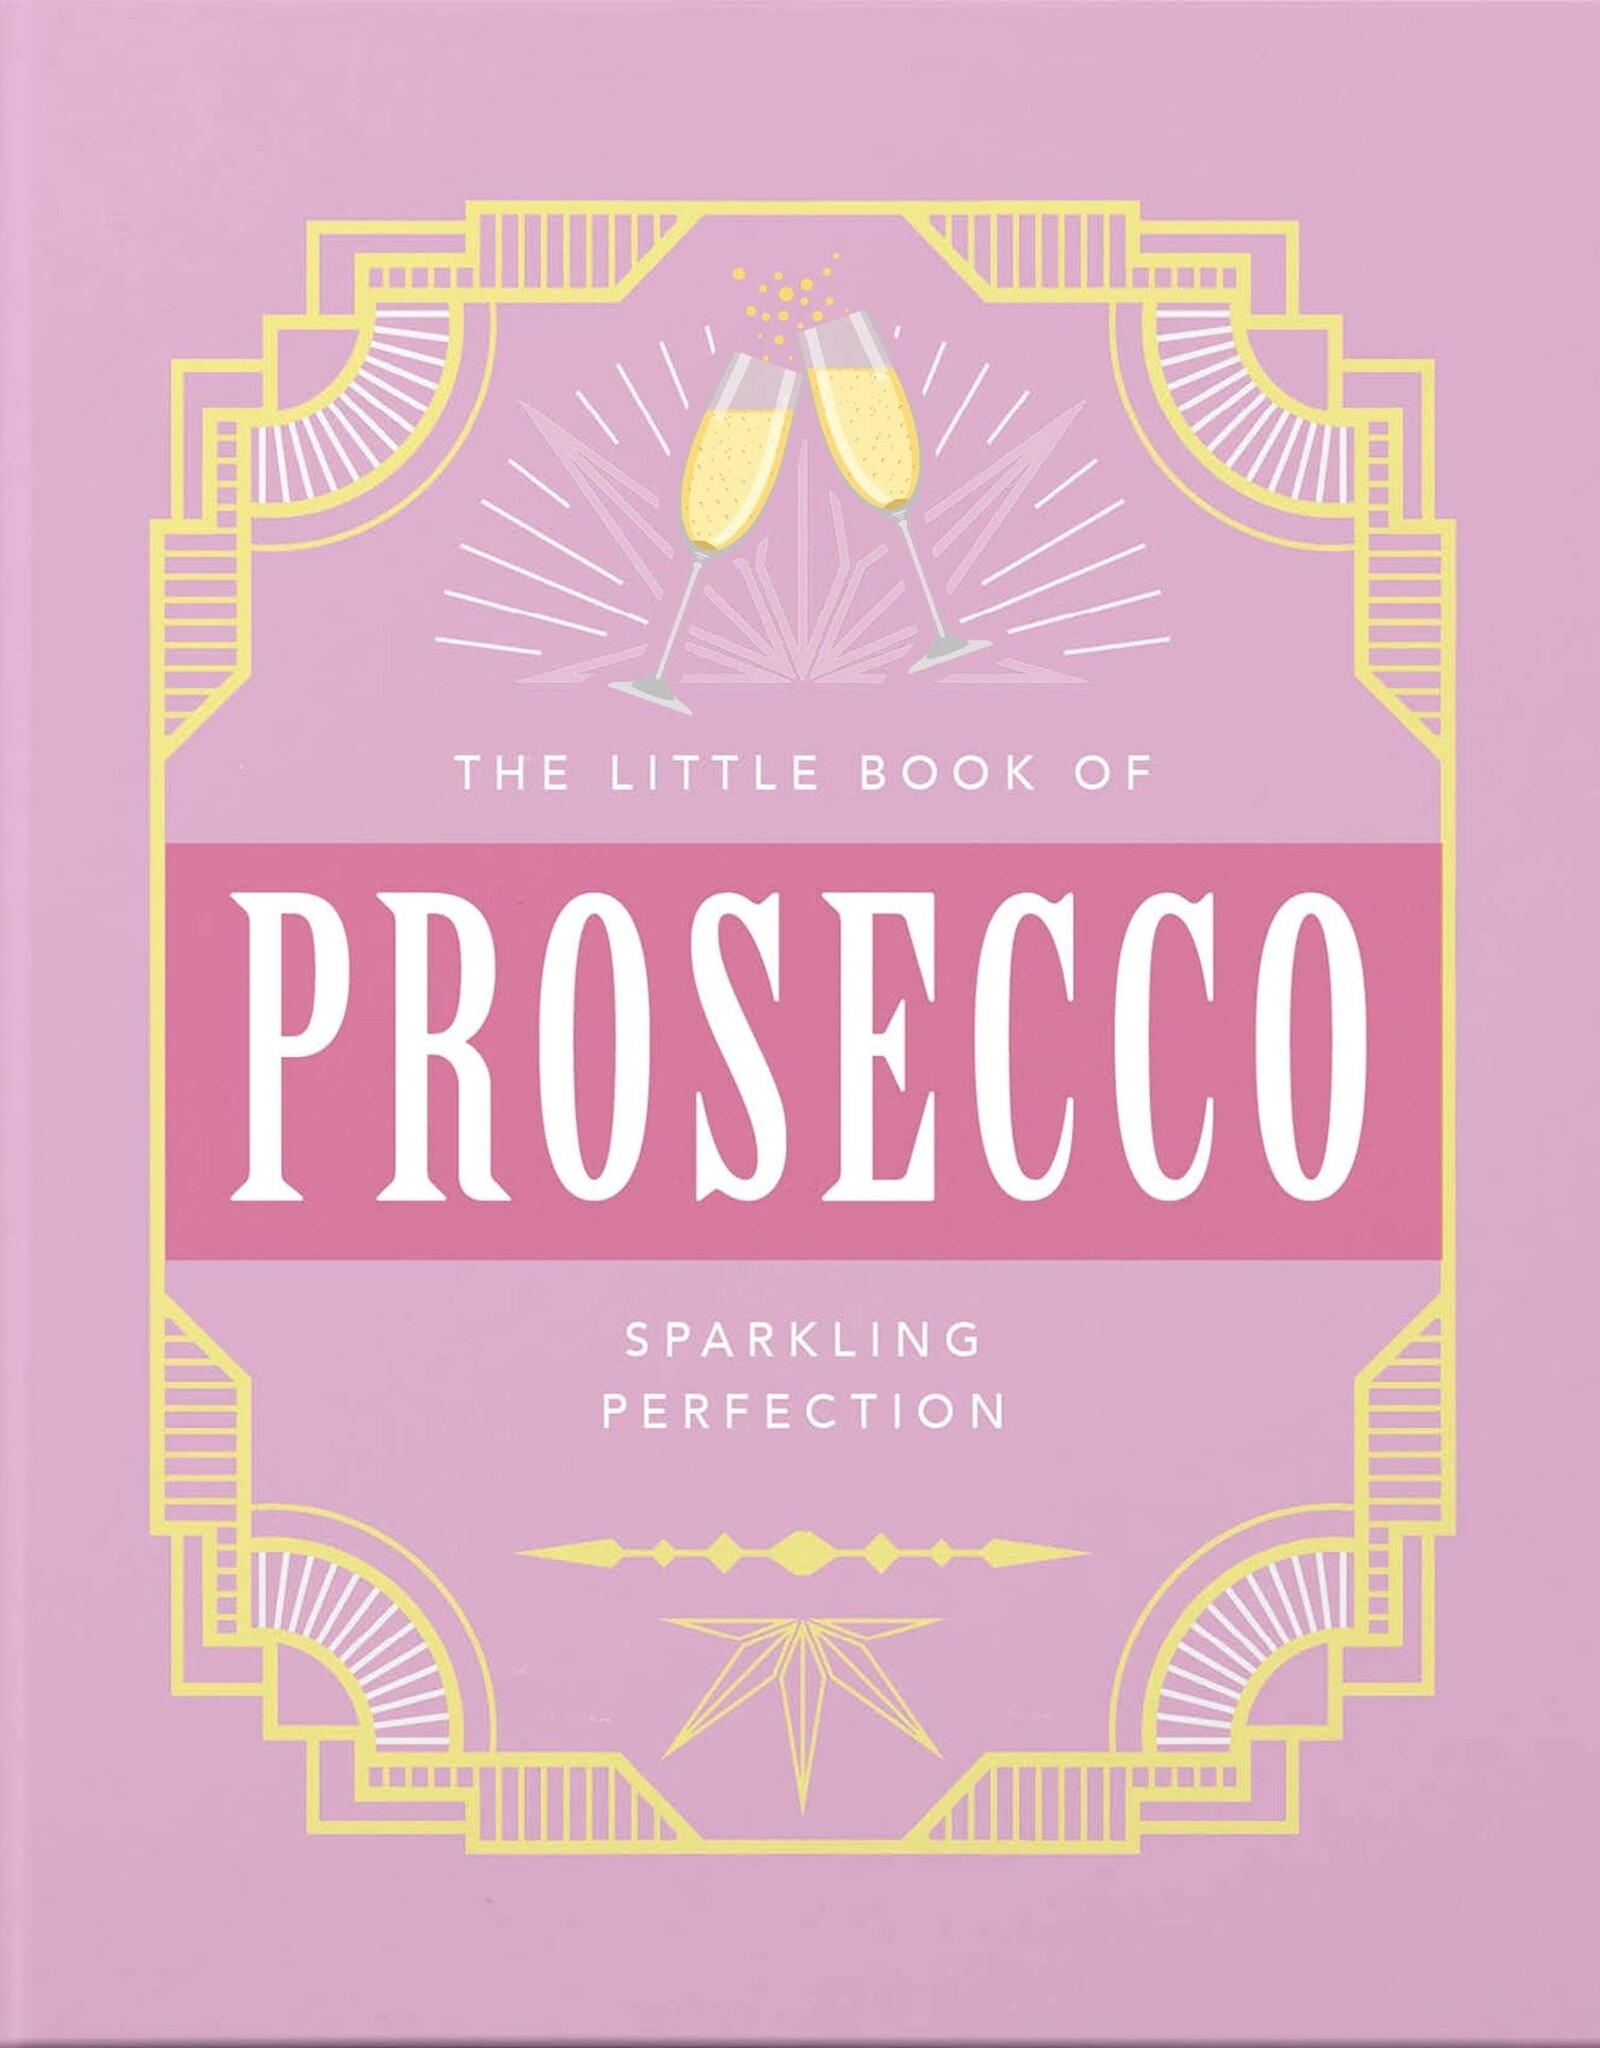 New Mags Little book of Procecco